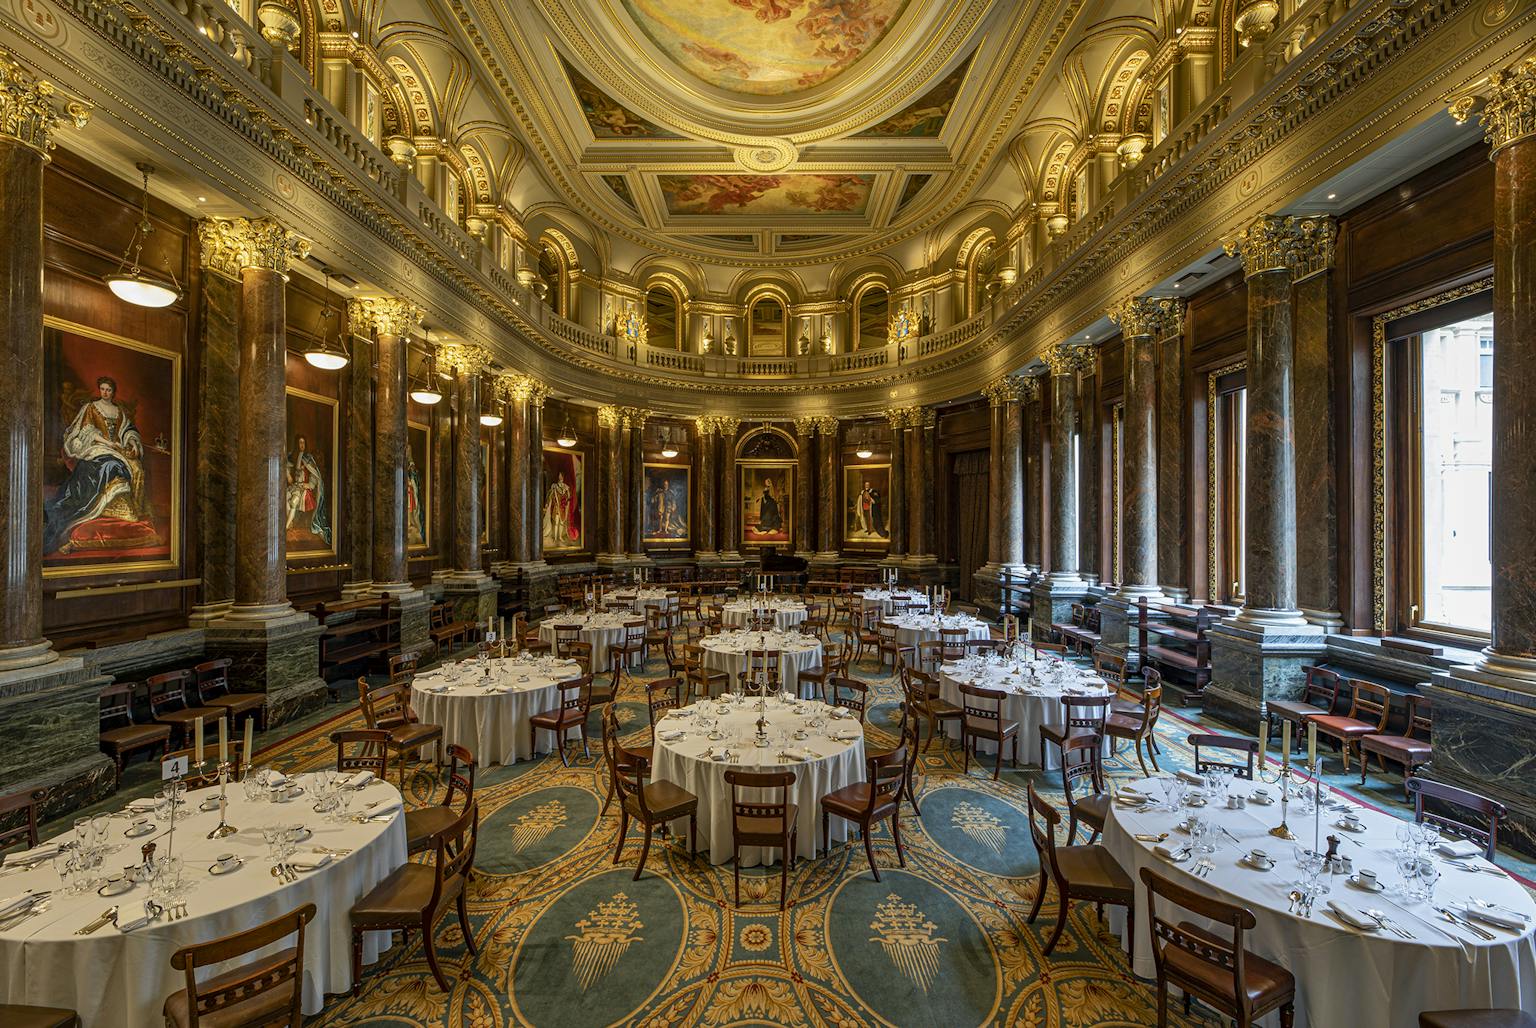 The dining set up at the recently restored Drapers' Hall